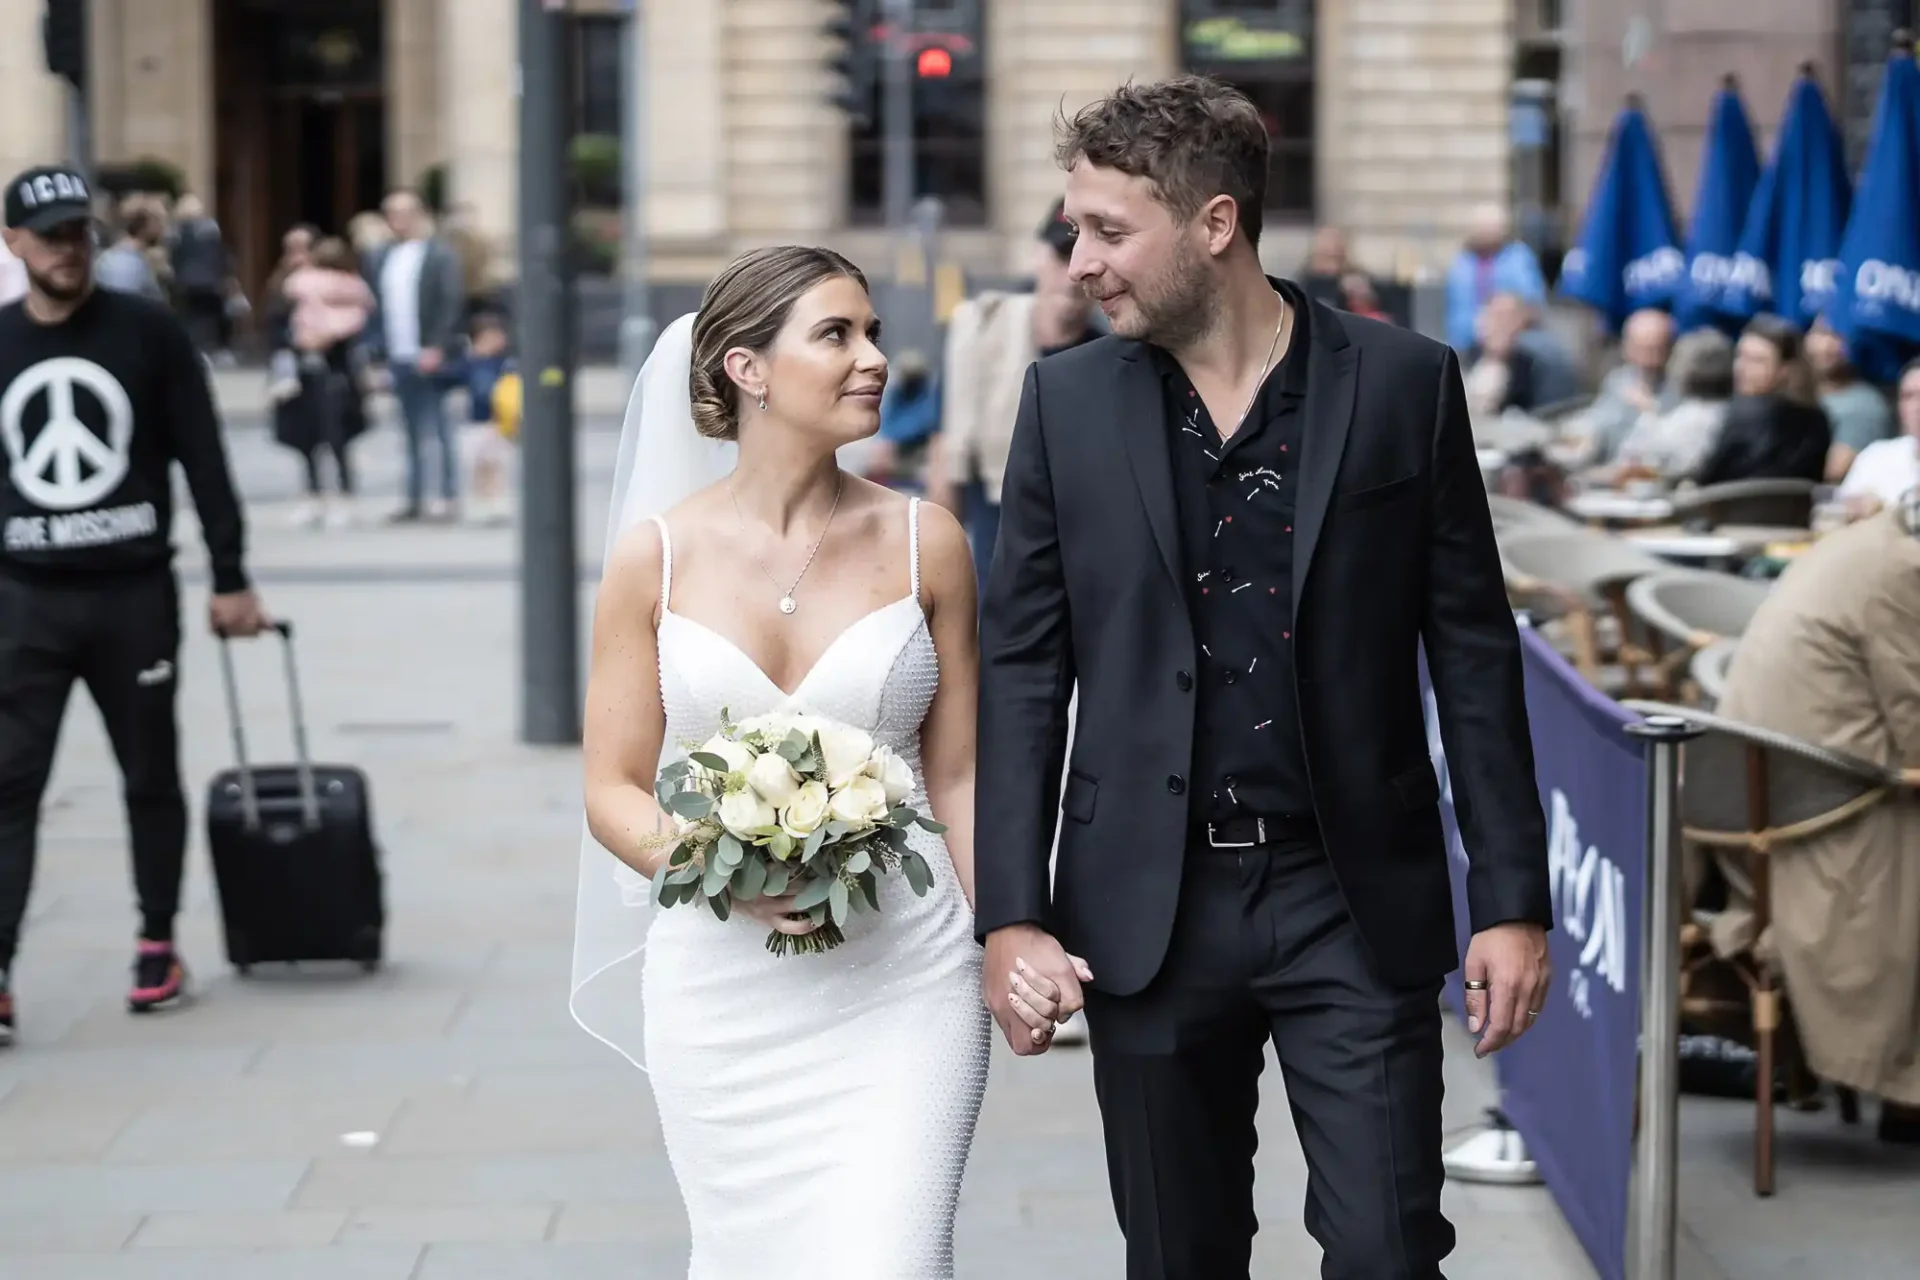 Newlywed couple walking hand in hand through a busy street, the bride holding a bouquet of white flowers, both smiling and looking at each other.